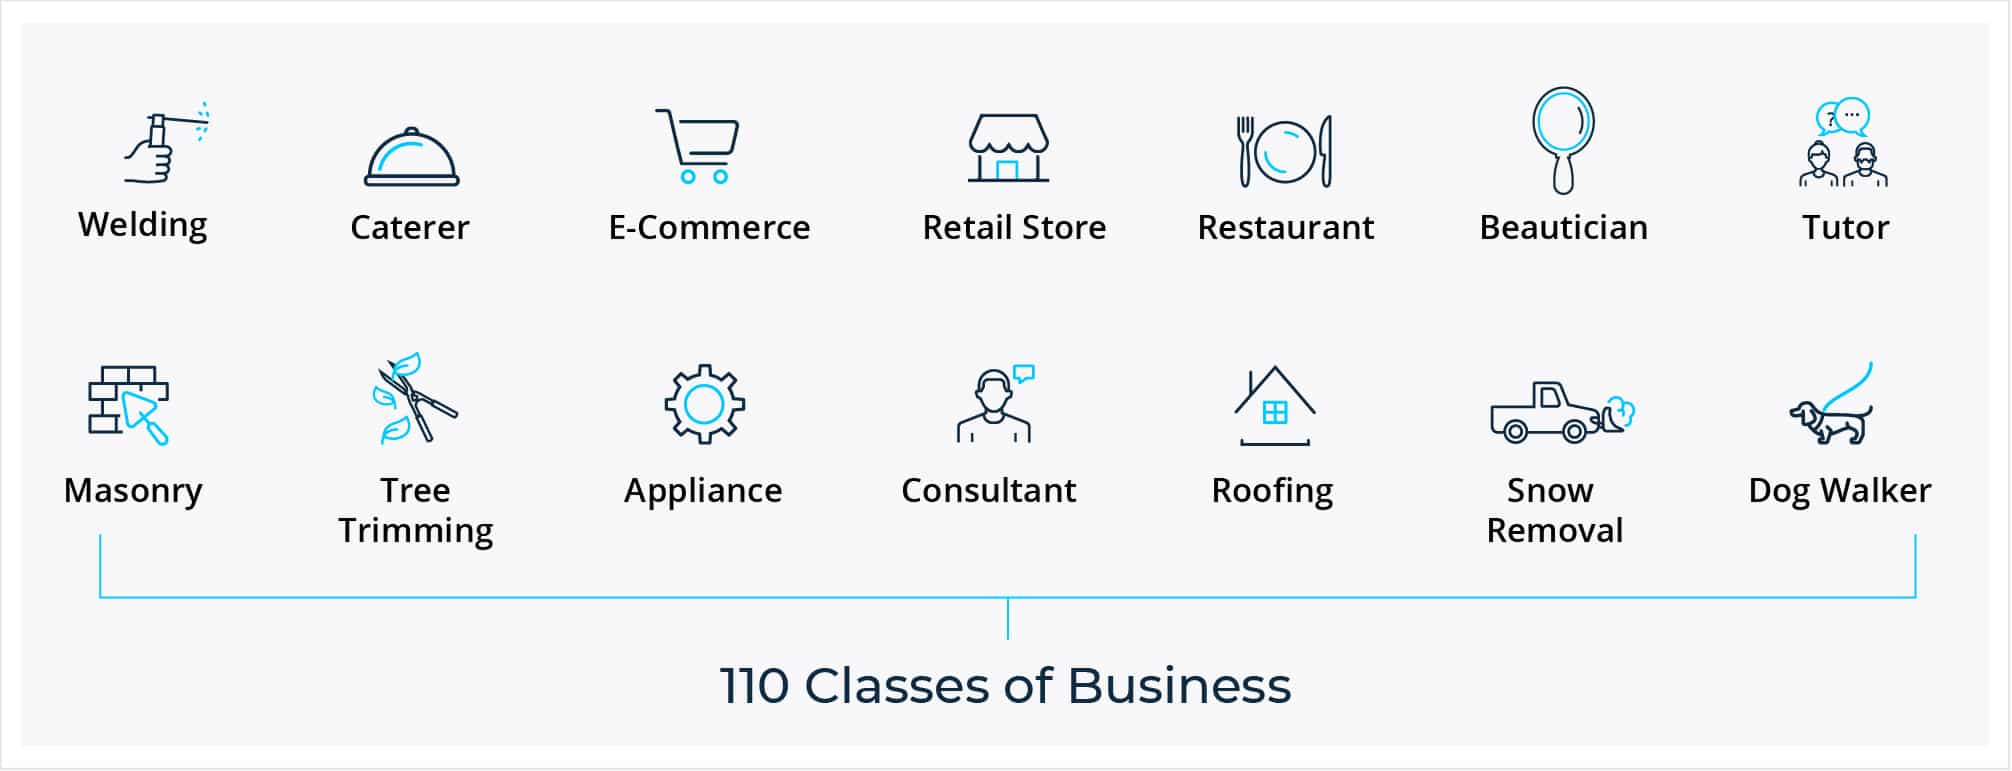 110 Classes of Business